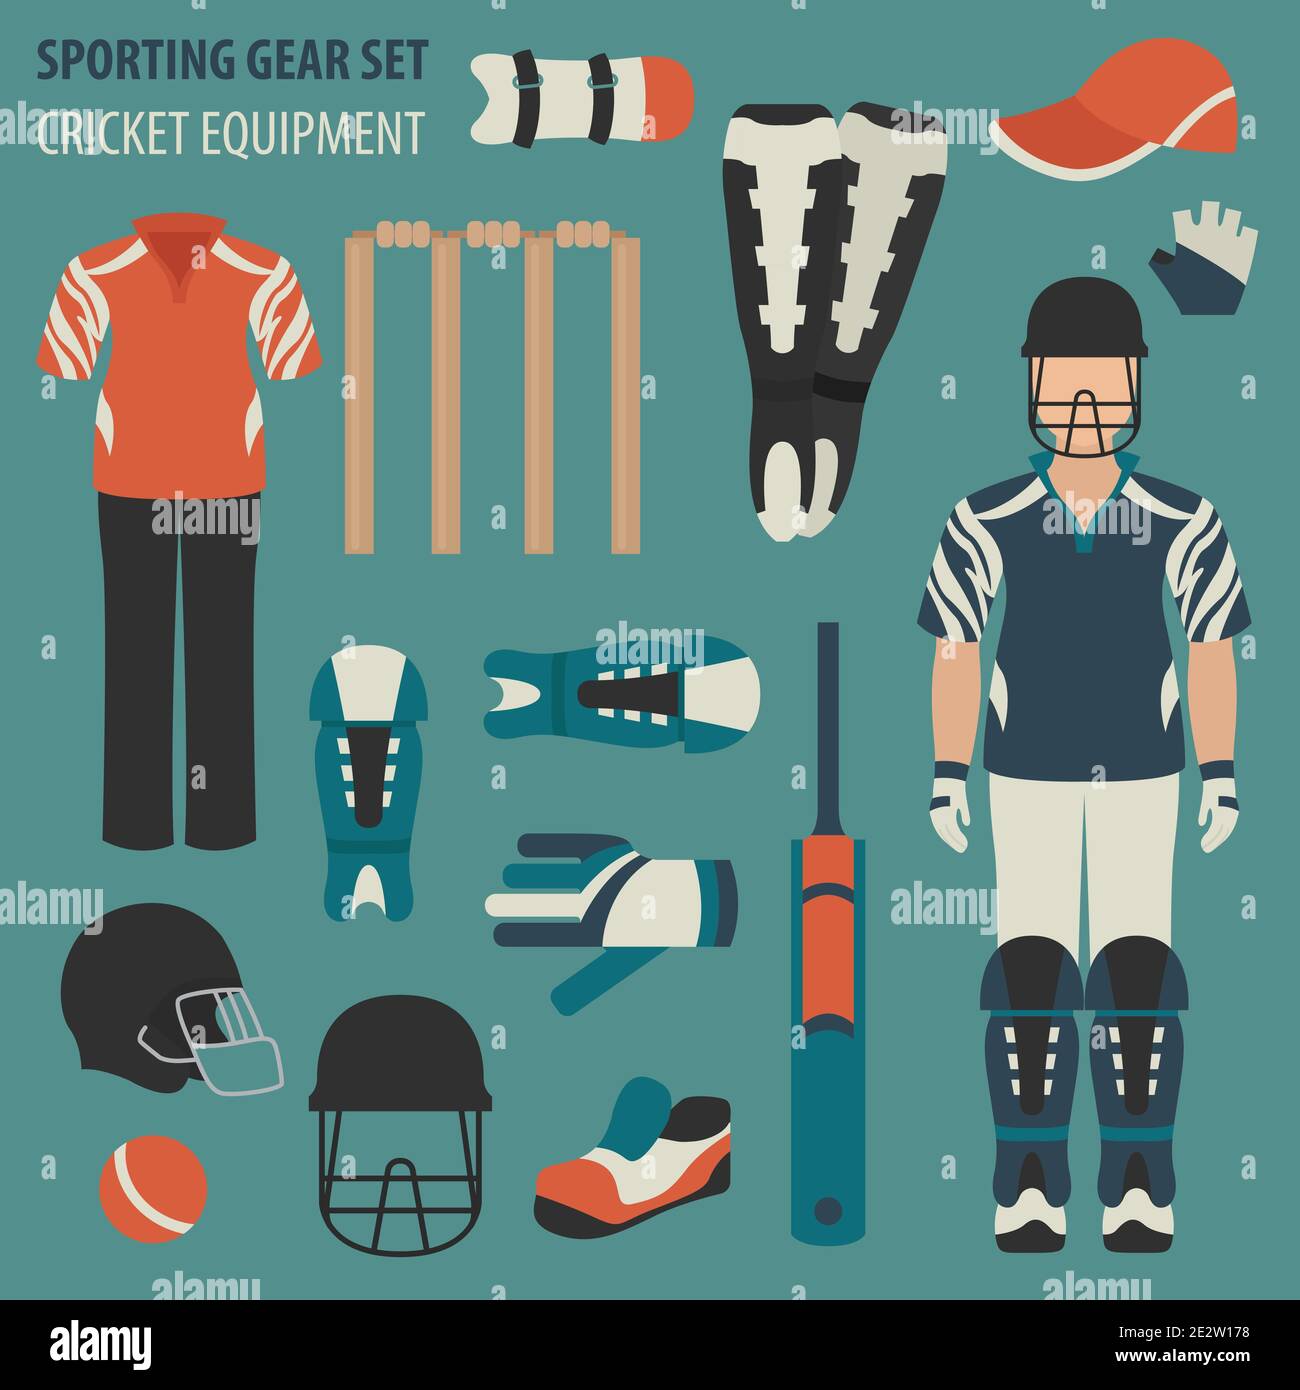 Sporting gear set. Cricketer equipment and accessories flat design icon.Vector illustration Stock Vector